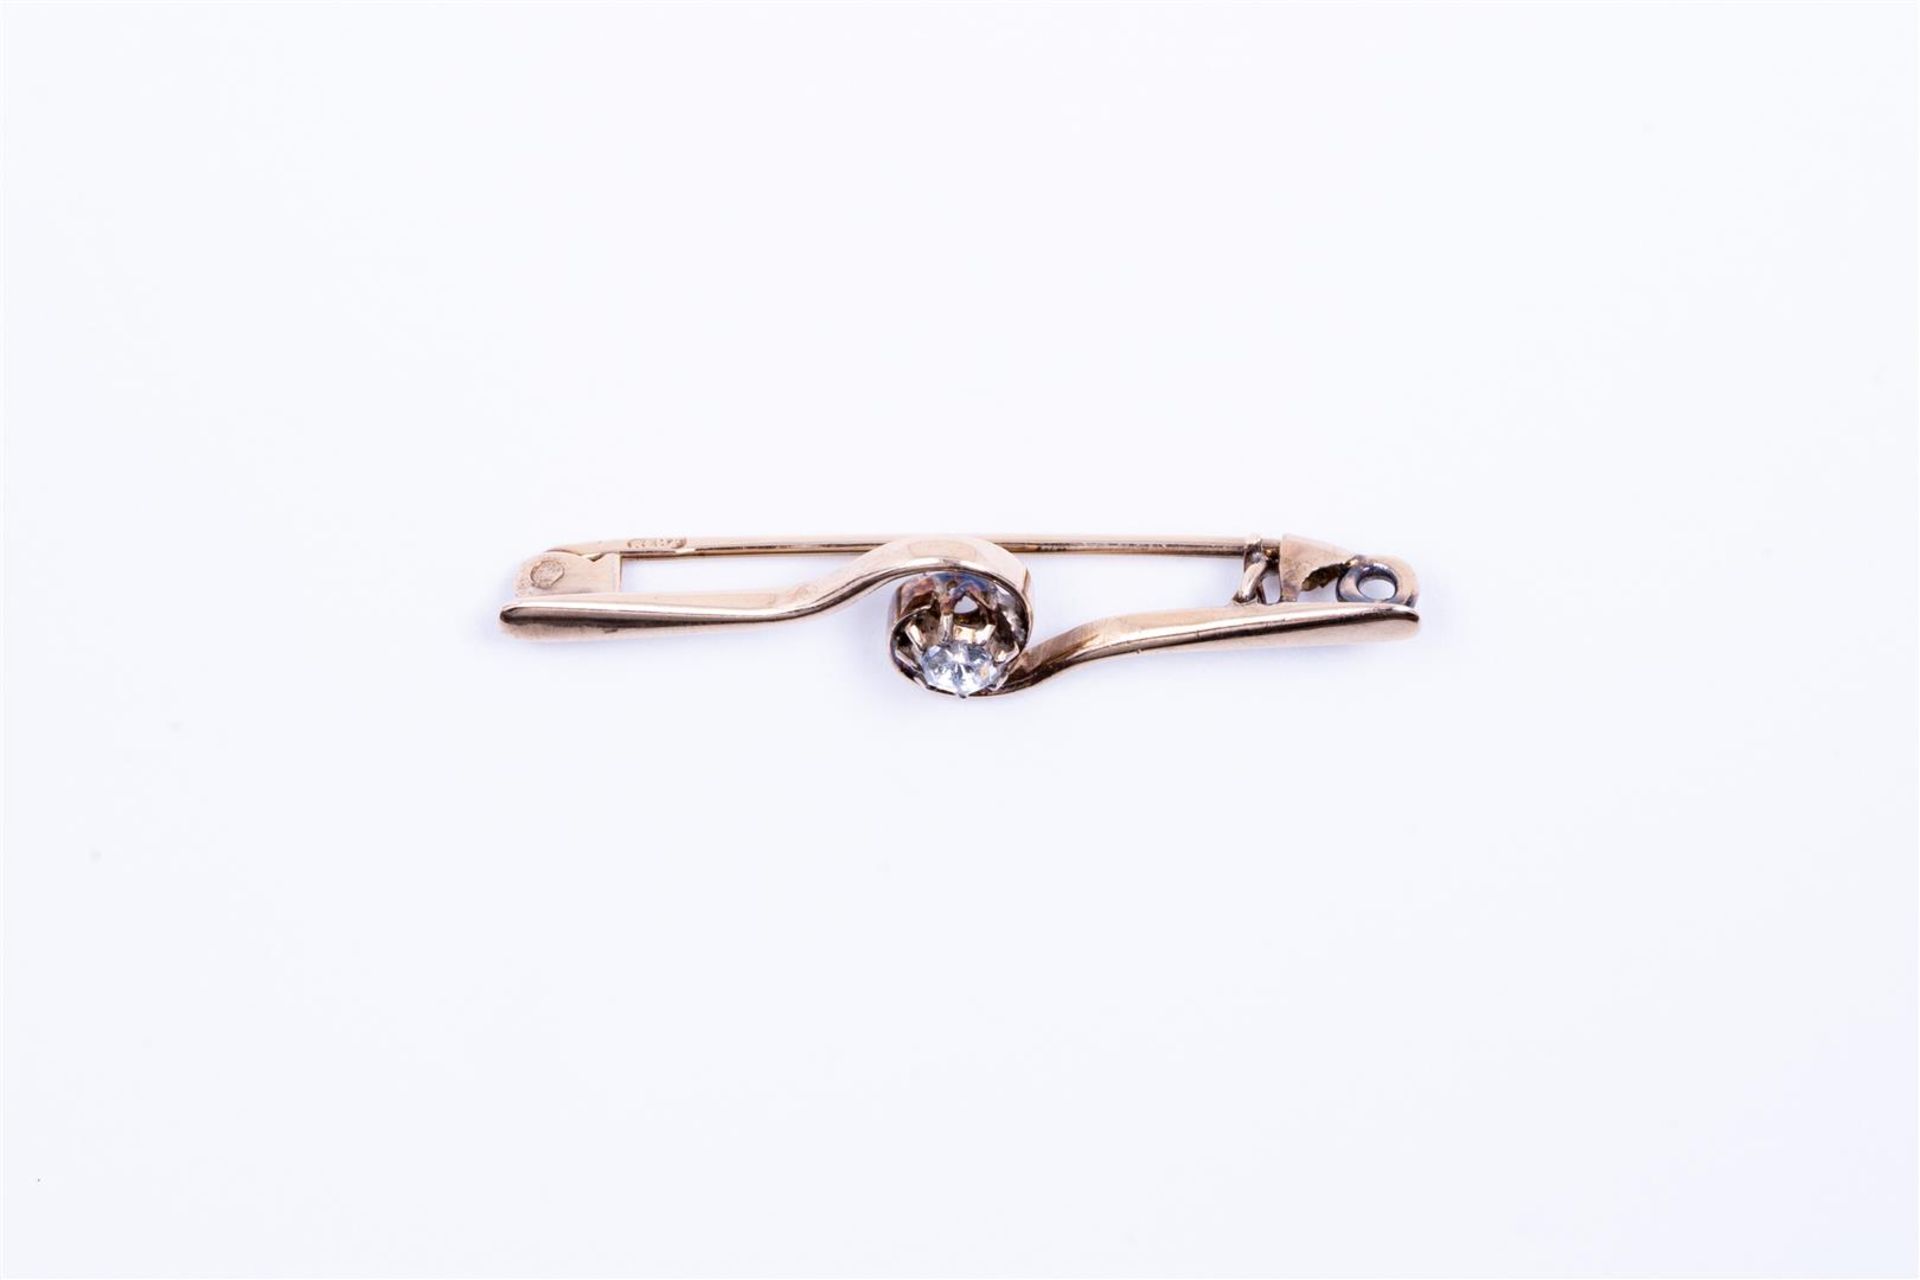 14kt yellow gold pin/brooch set with diamonds.
The brooch/pin is set with 1 rose cut diamond of 0.15